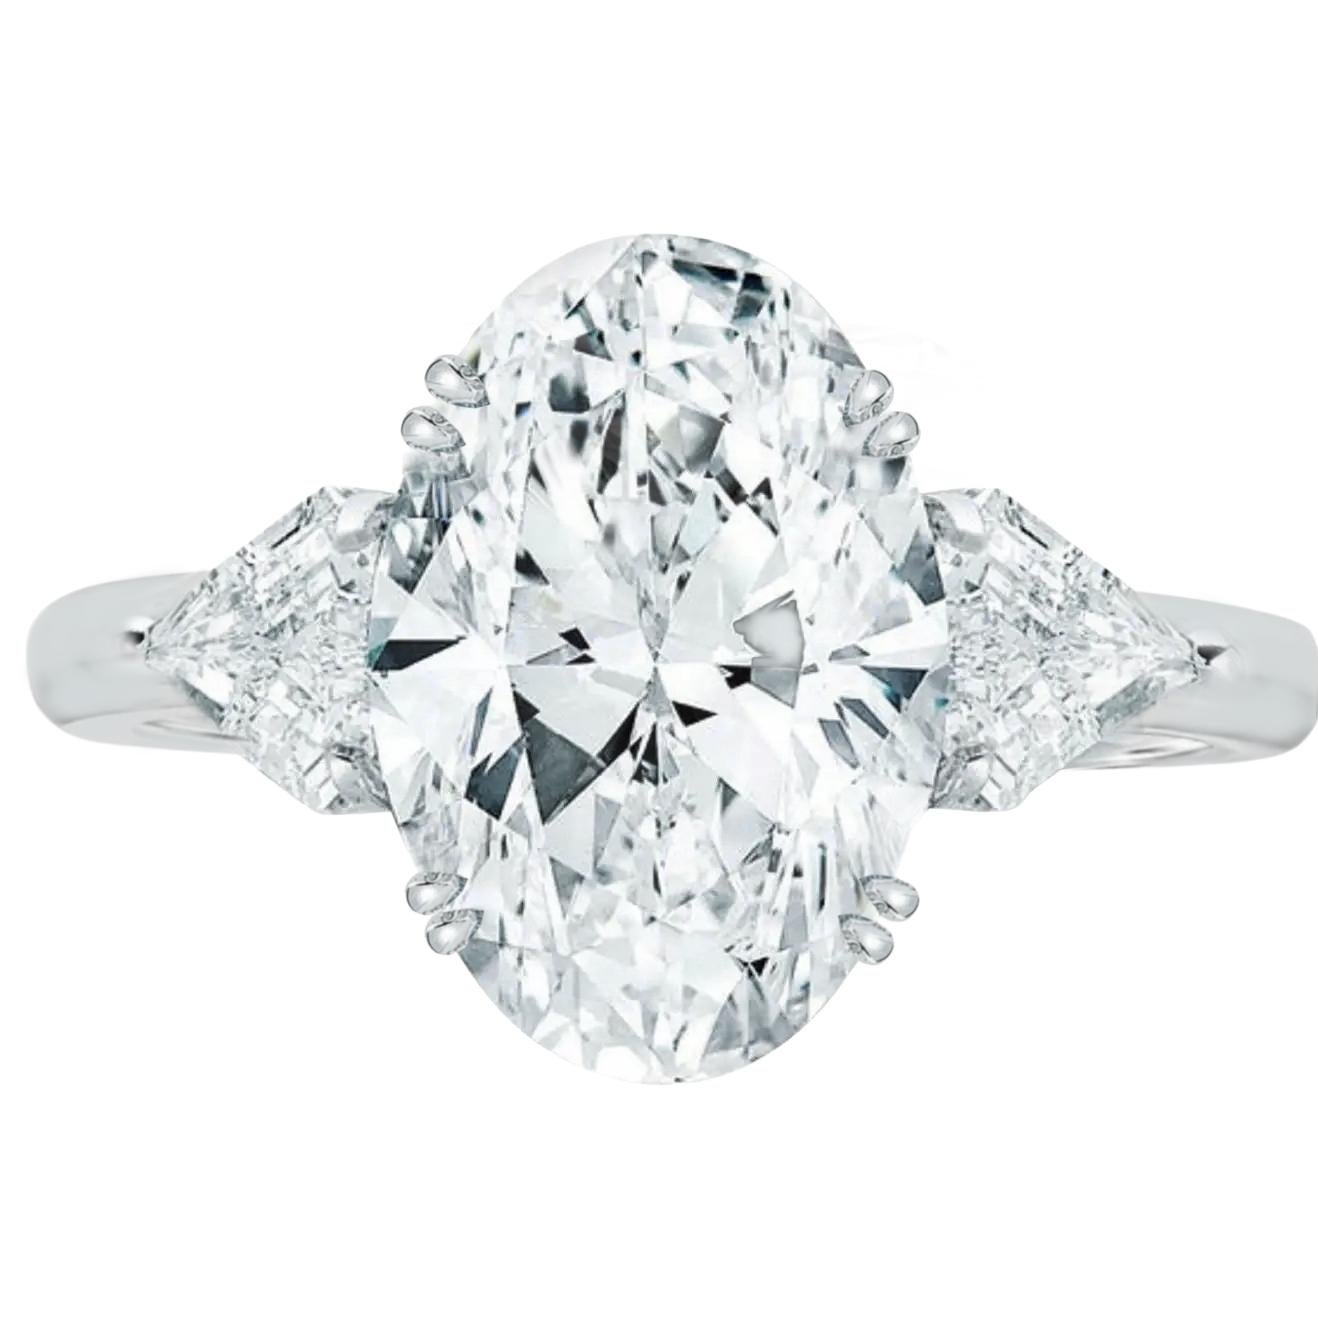 2 carat solitaire oval diamond ring